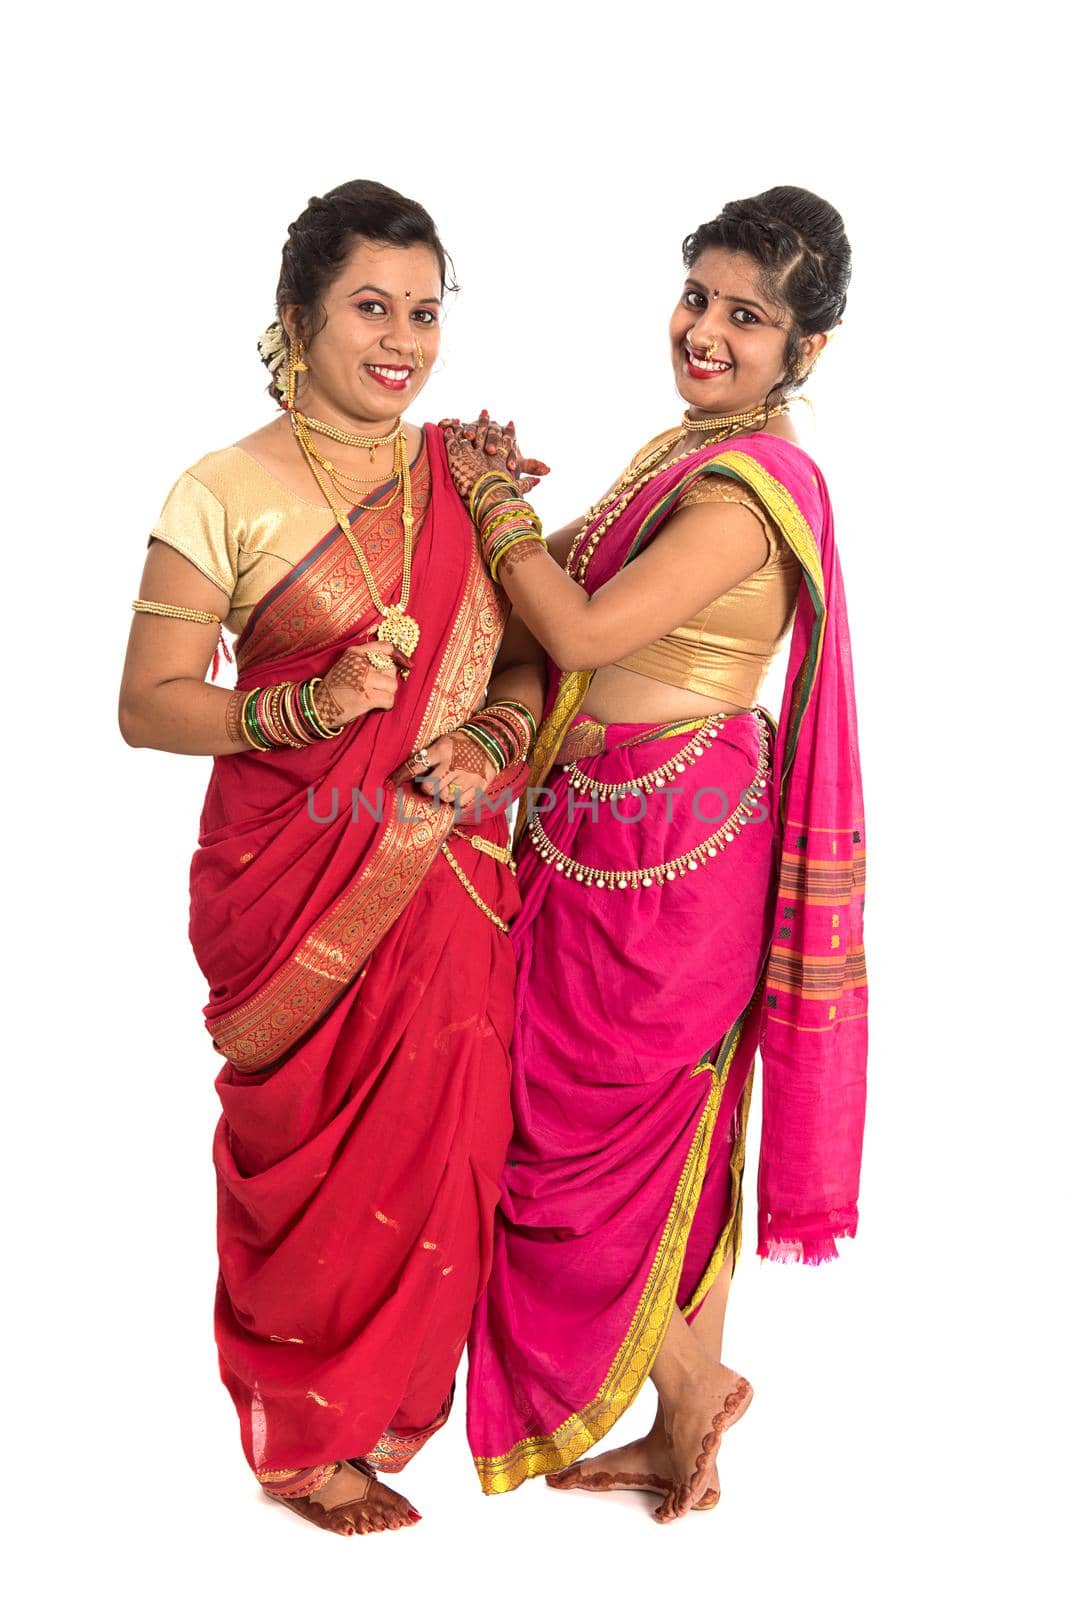 Traditional Beautiful Indian young girls in saree posing on white background by DipakShelare